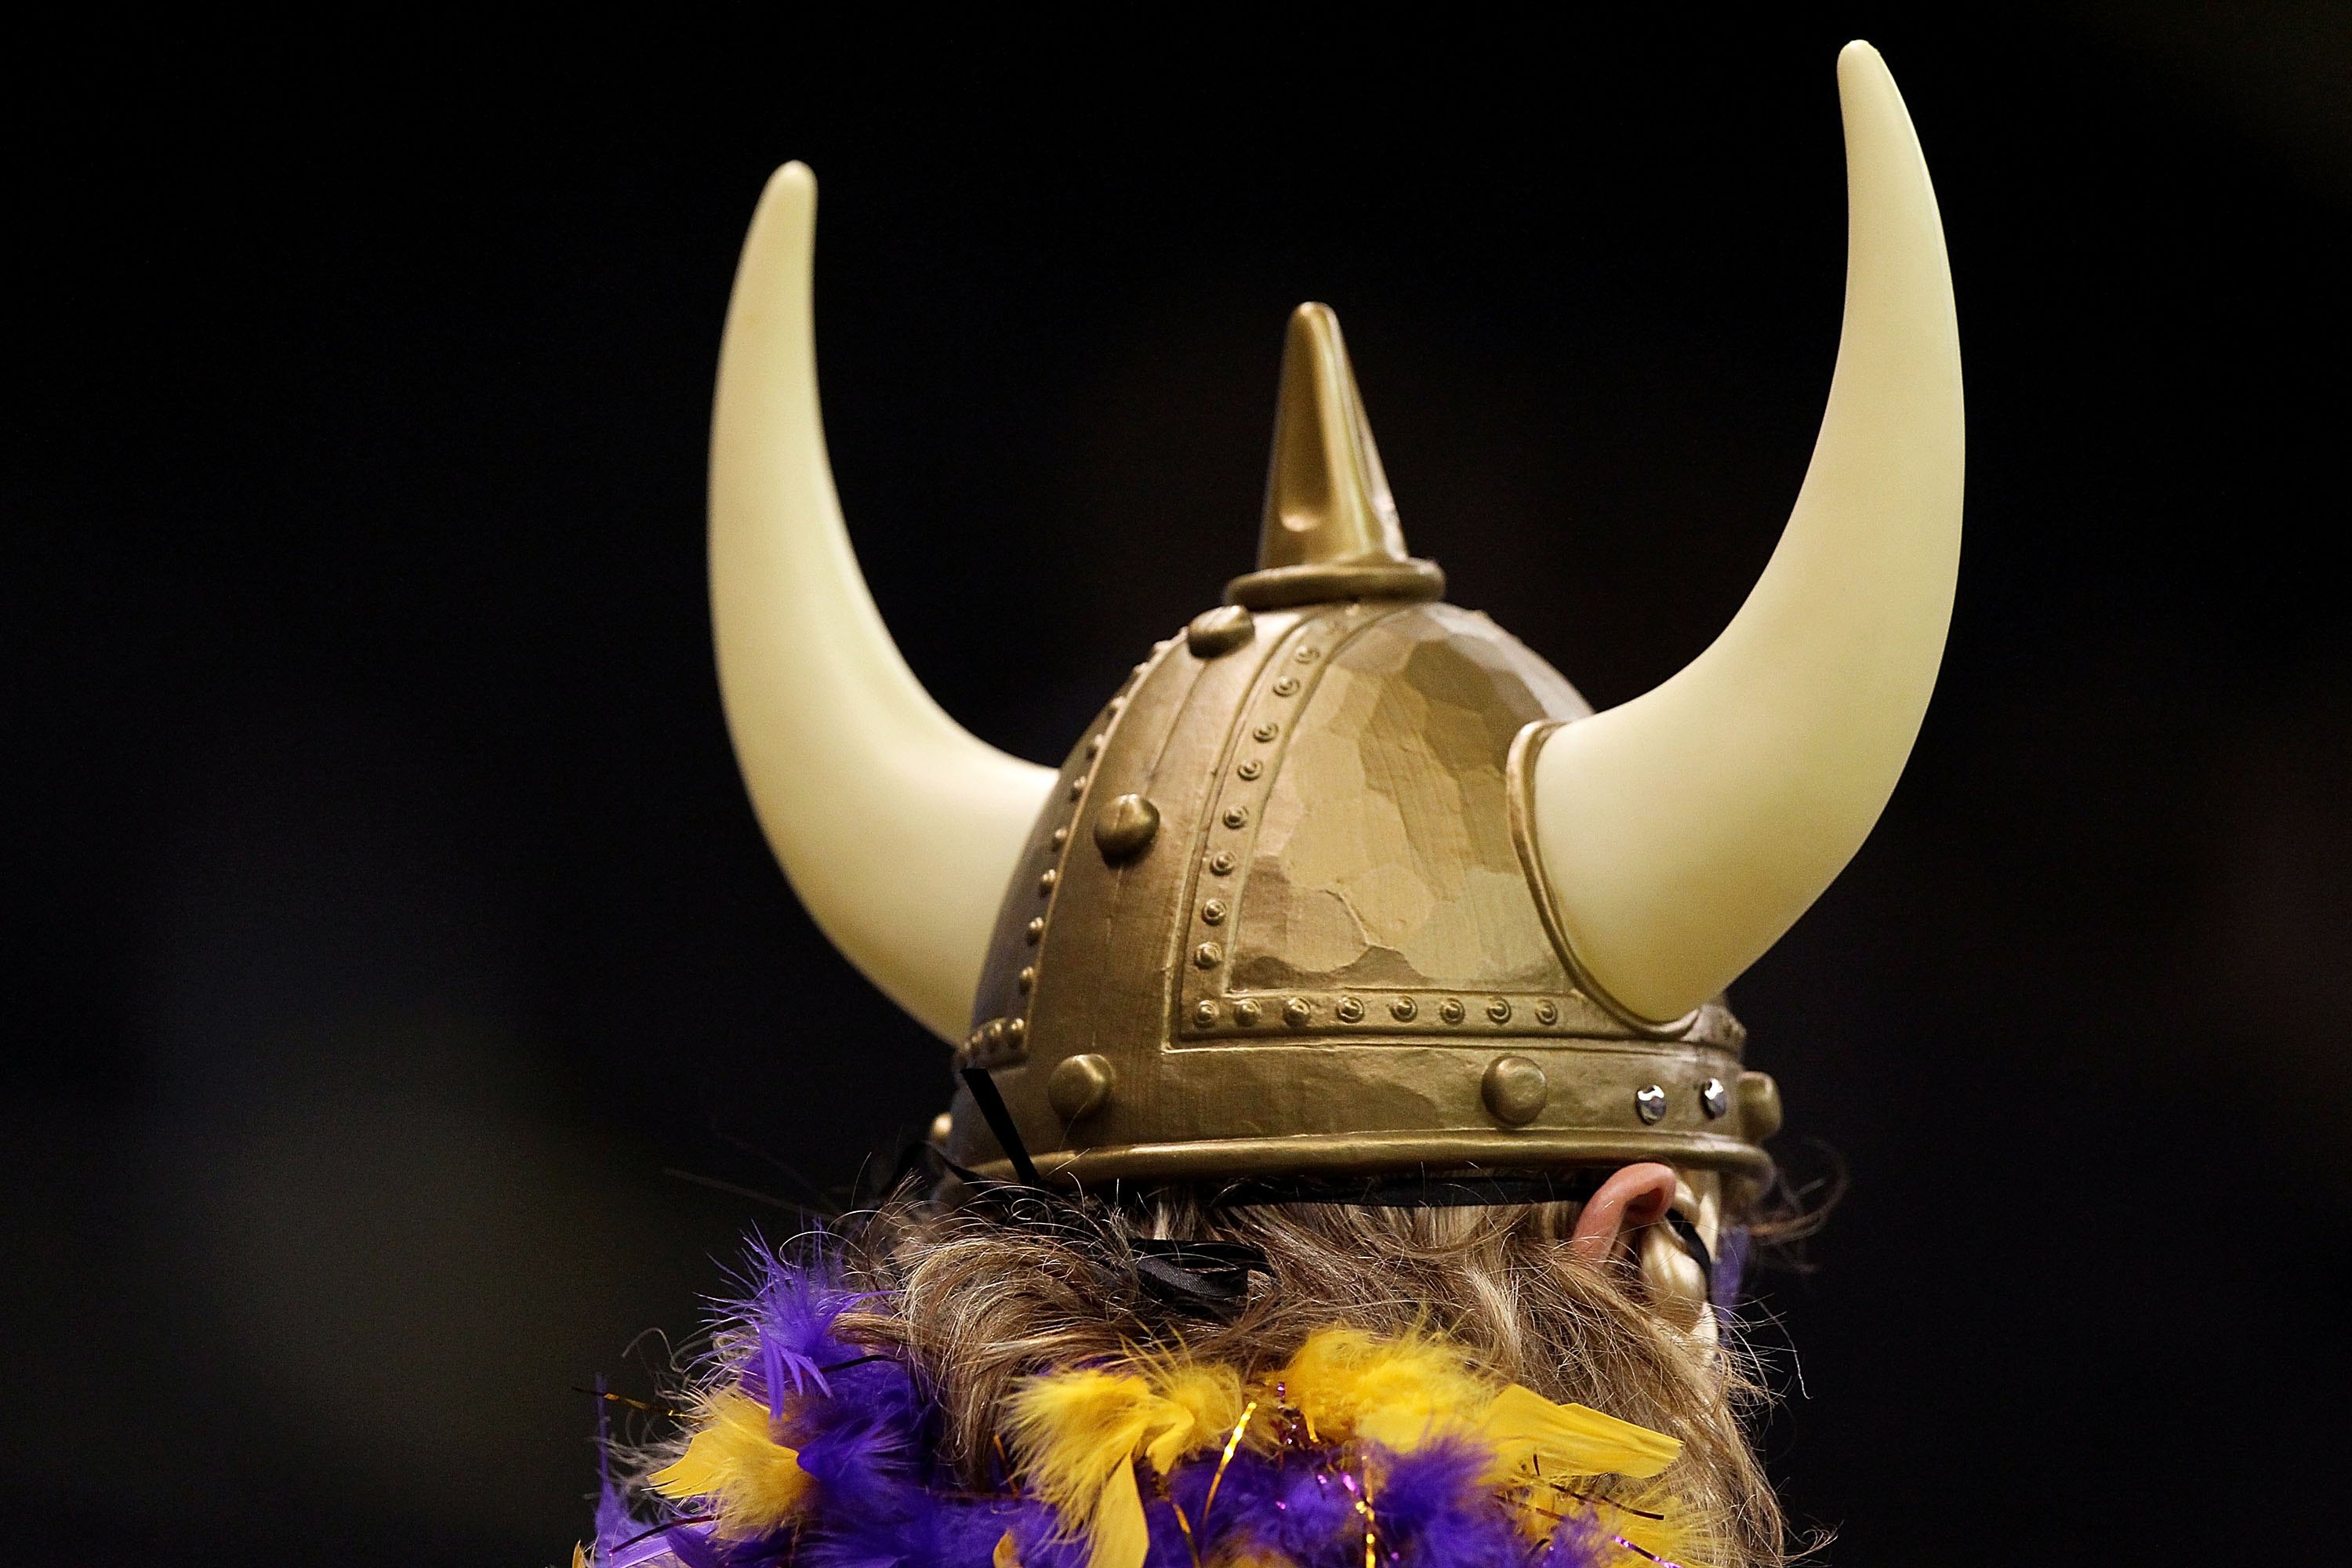 NEW ORLEANS - JANUARY 24:  A rear detail view of a fan of the Minnesota Vikings wearing a viking helmet with horns against the New Orleans Saints during the NFC Championship Game at the Louisiana Superdome on January 24, 2010 in New Orleans, Louisiana.  (